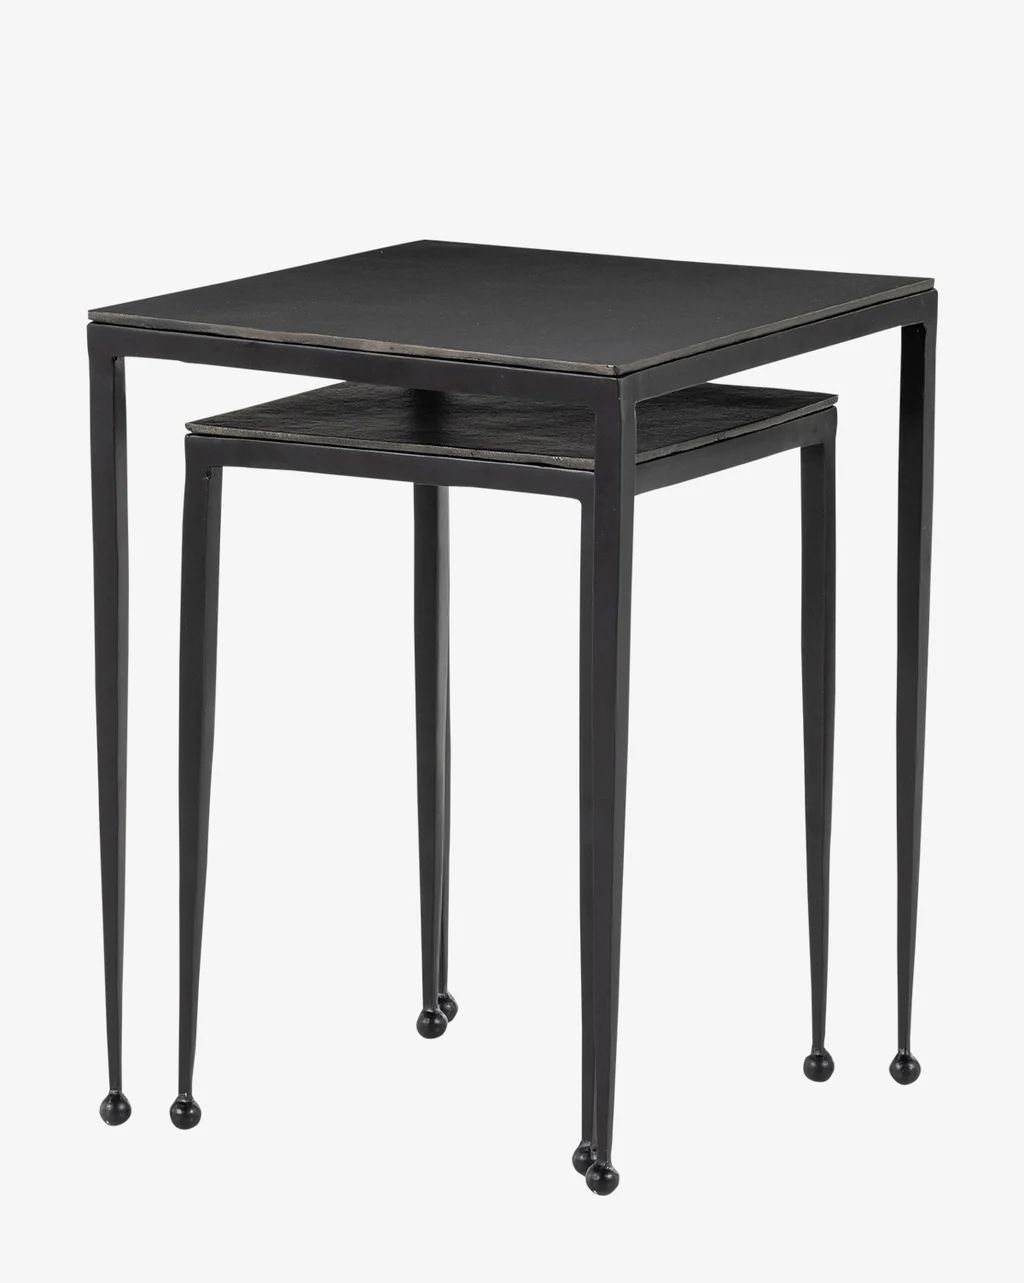 Biddy Nesting End Tables | McGee & Co.